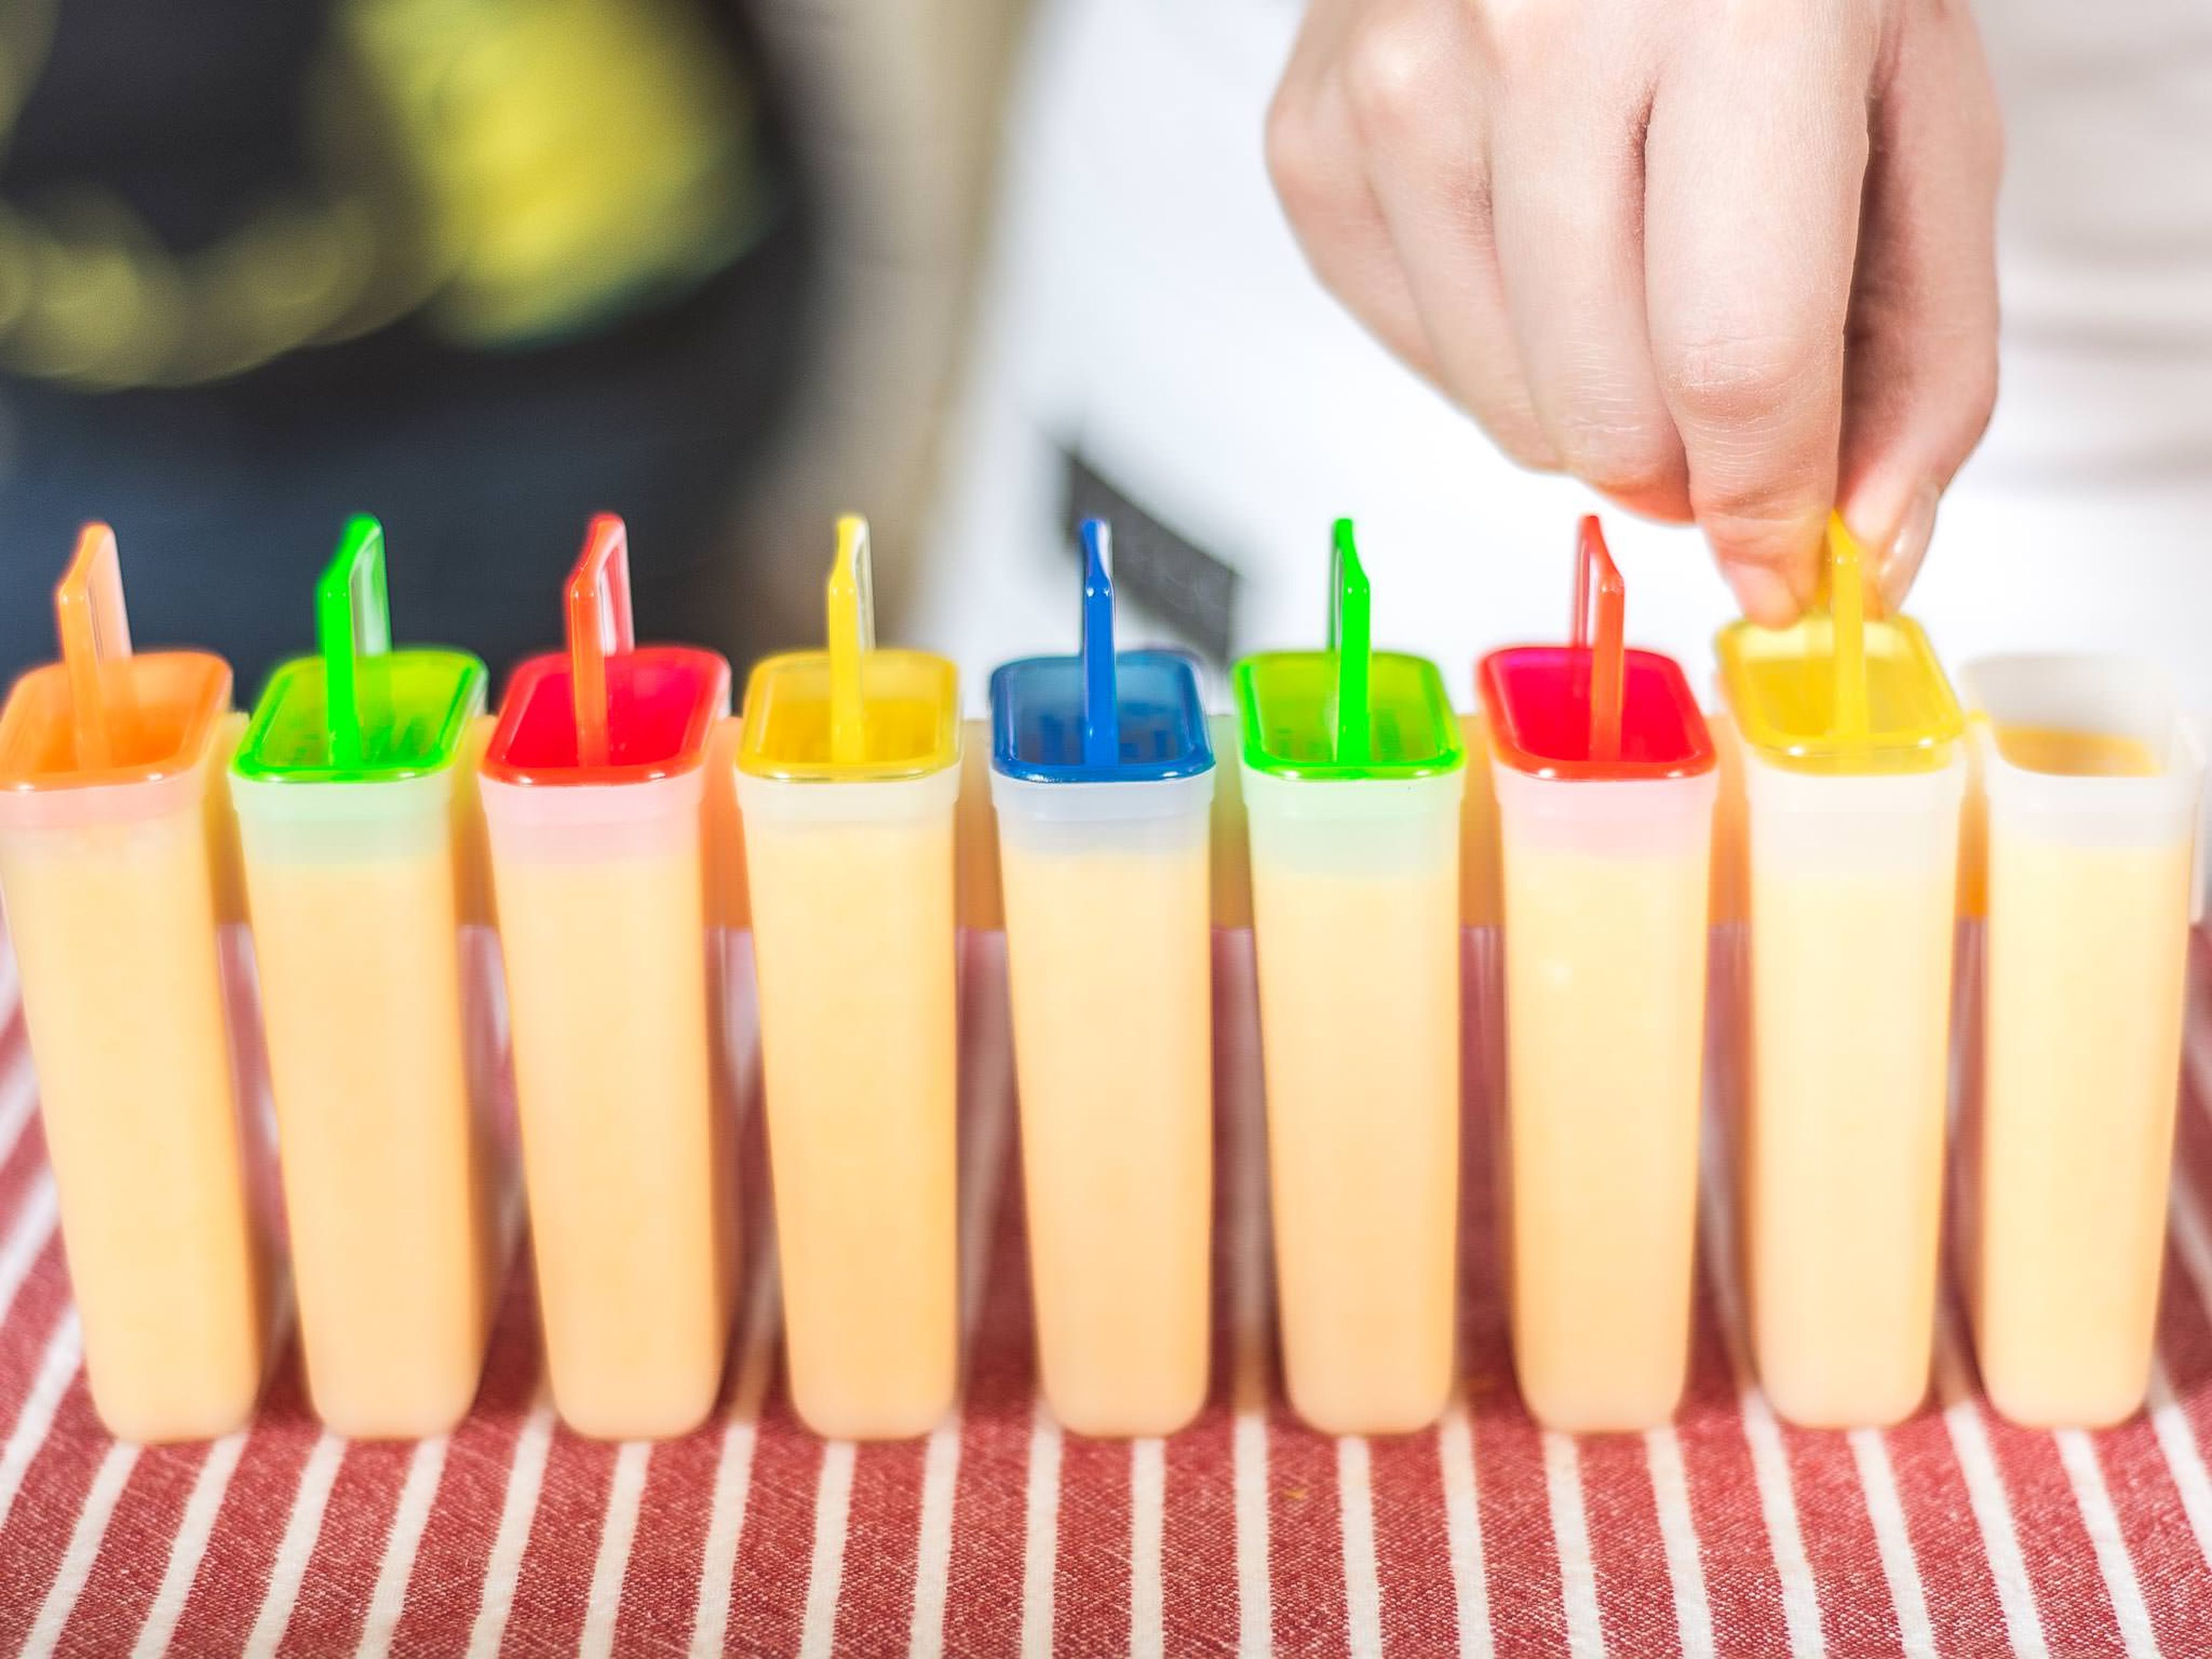 Next, fill the popsicle molds with the mixture. Freeze for at least 4 - 5 hours. Enjoy!